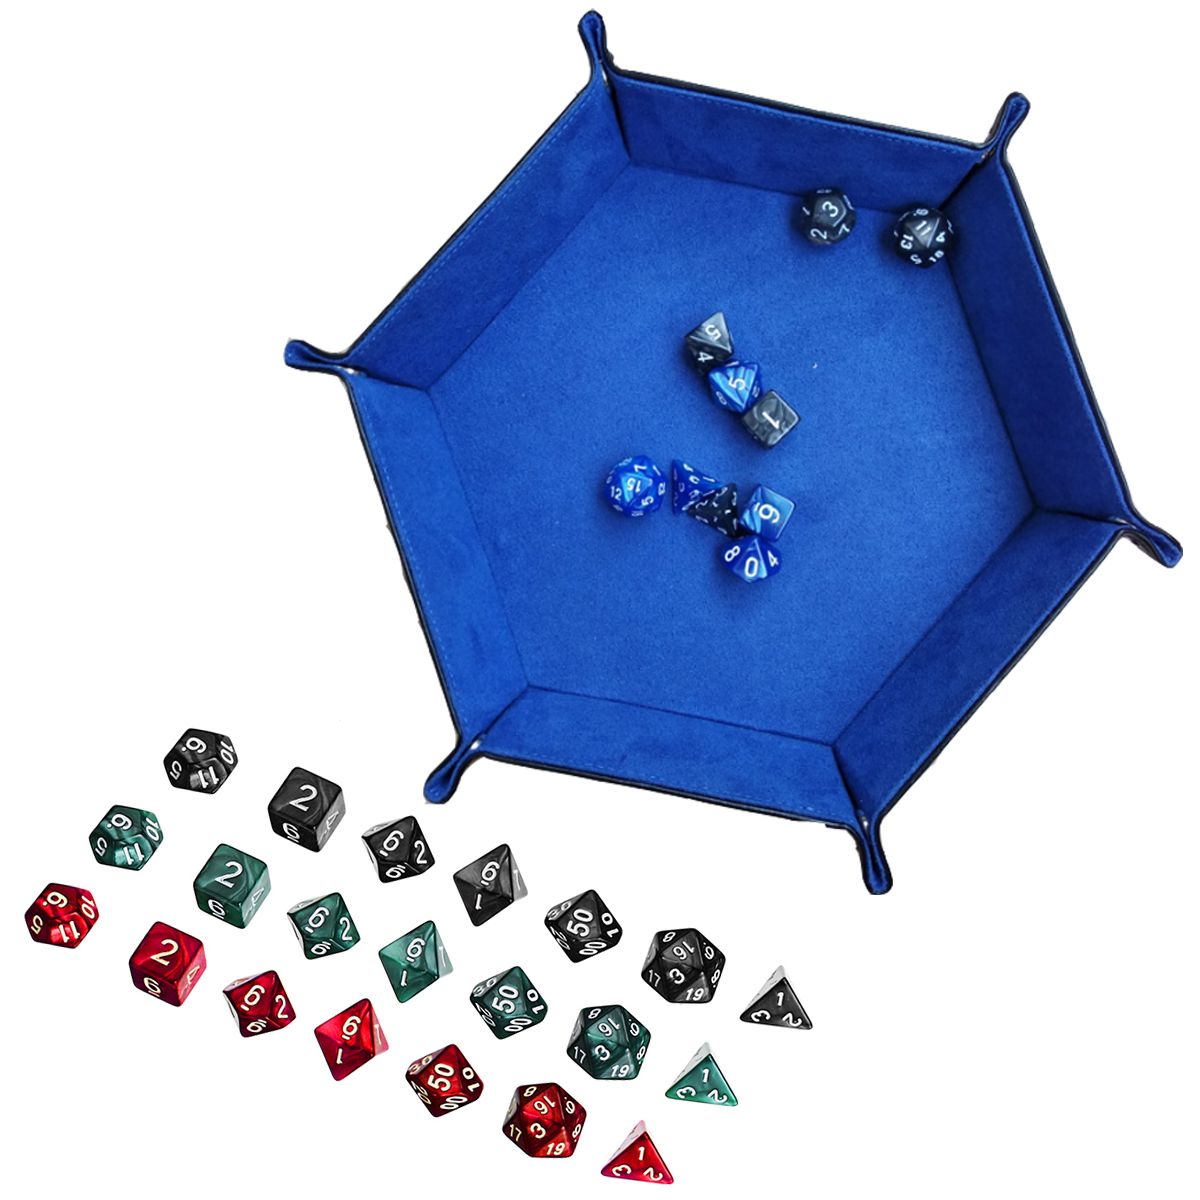 Multisided-Dices-Set-Holder-Polyhedral-Dices-Blue-PU-Leather-Tray-for-RPG-1373172